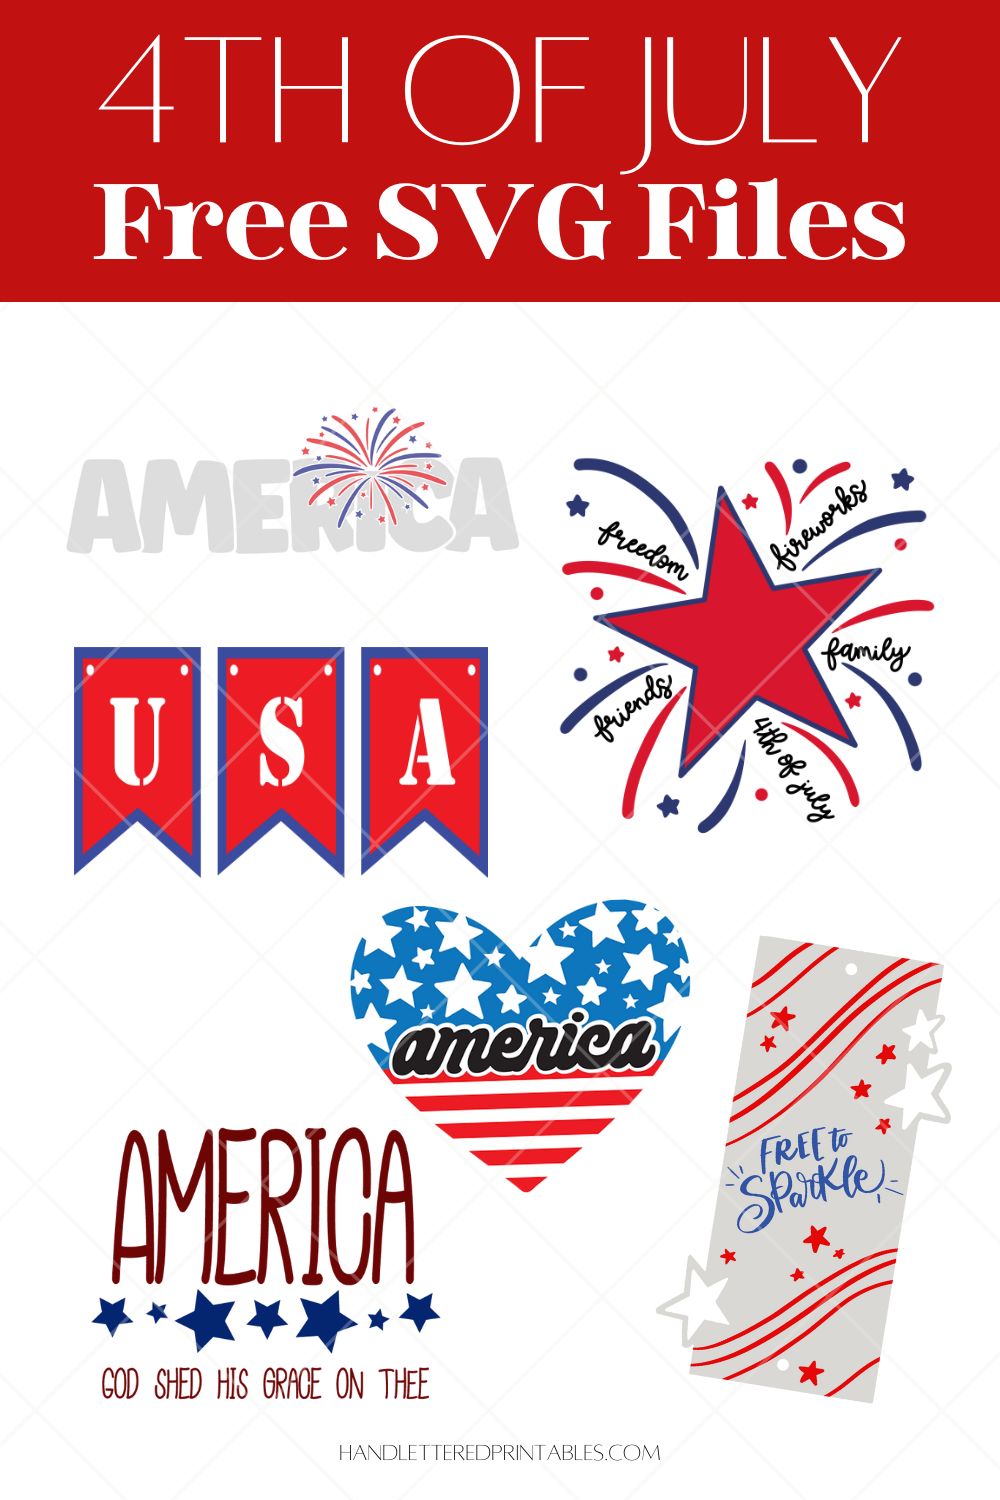 text over reads: 4th of July free SVG files image is collage of the SVG files on white background